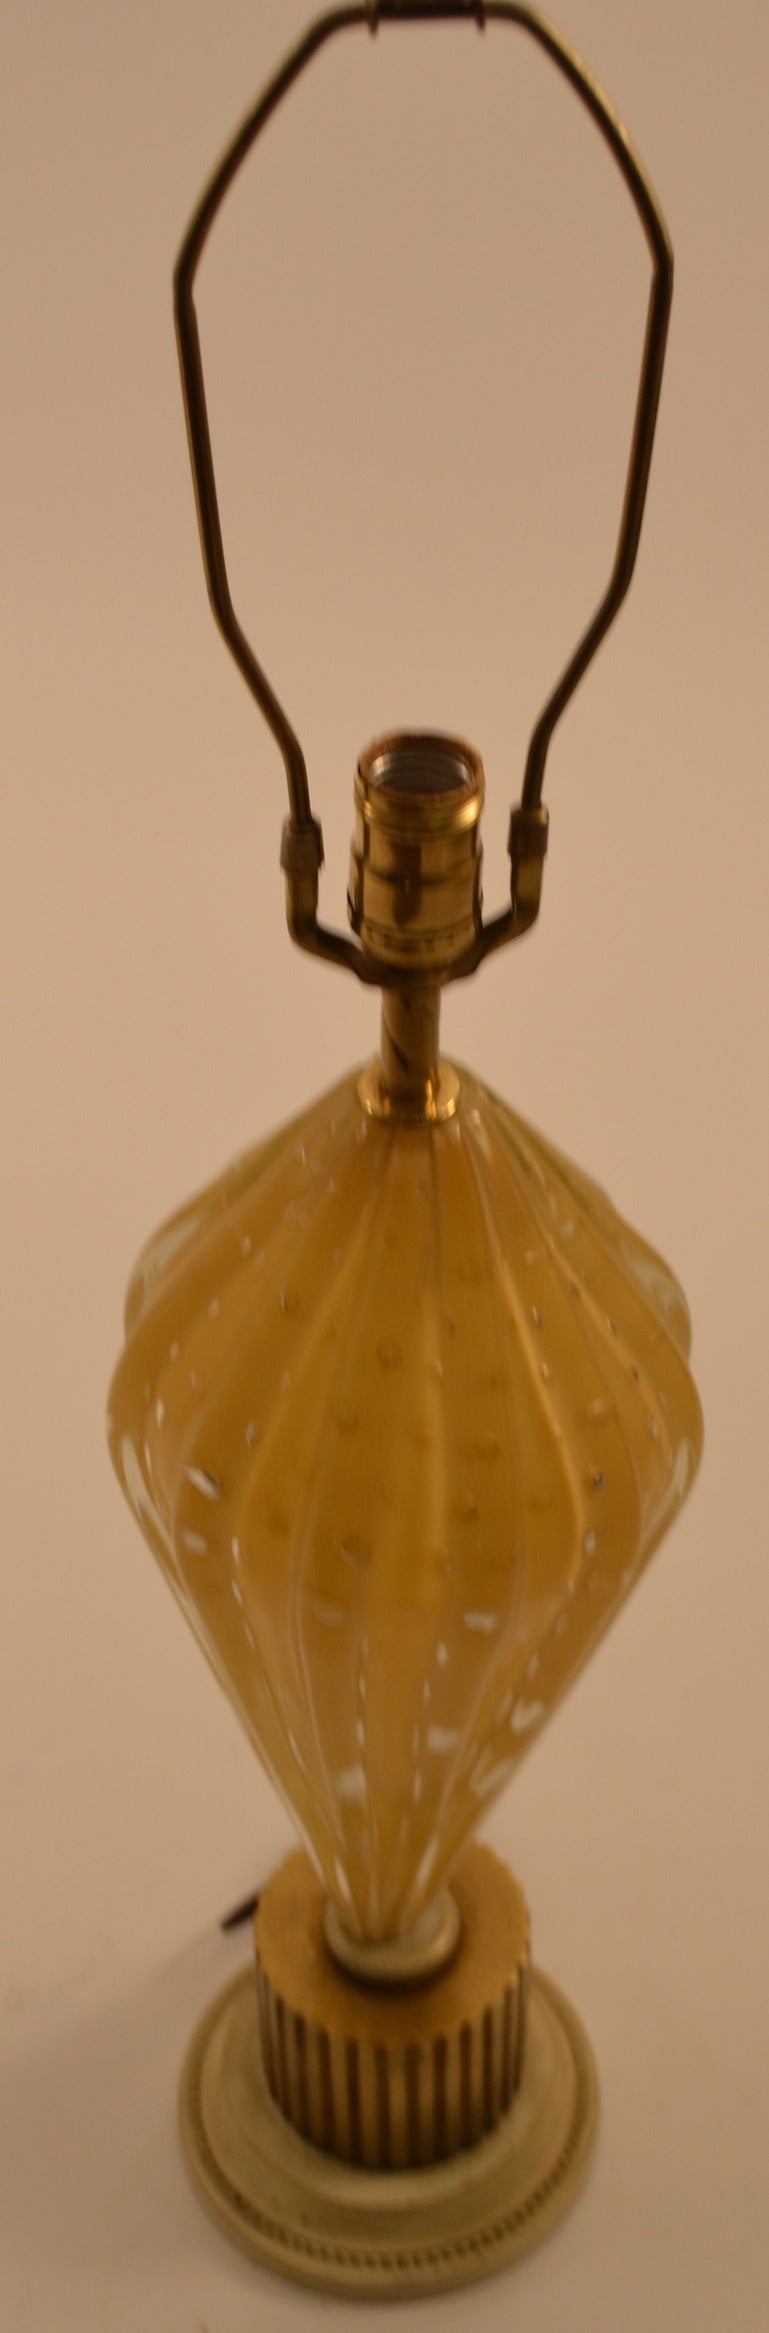 Controlled bubble Murano Glass body on fluted column base, probably by Barovier. Shade not included in lot.Height in listing includes harp, Height to top of glass is 22